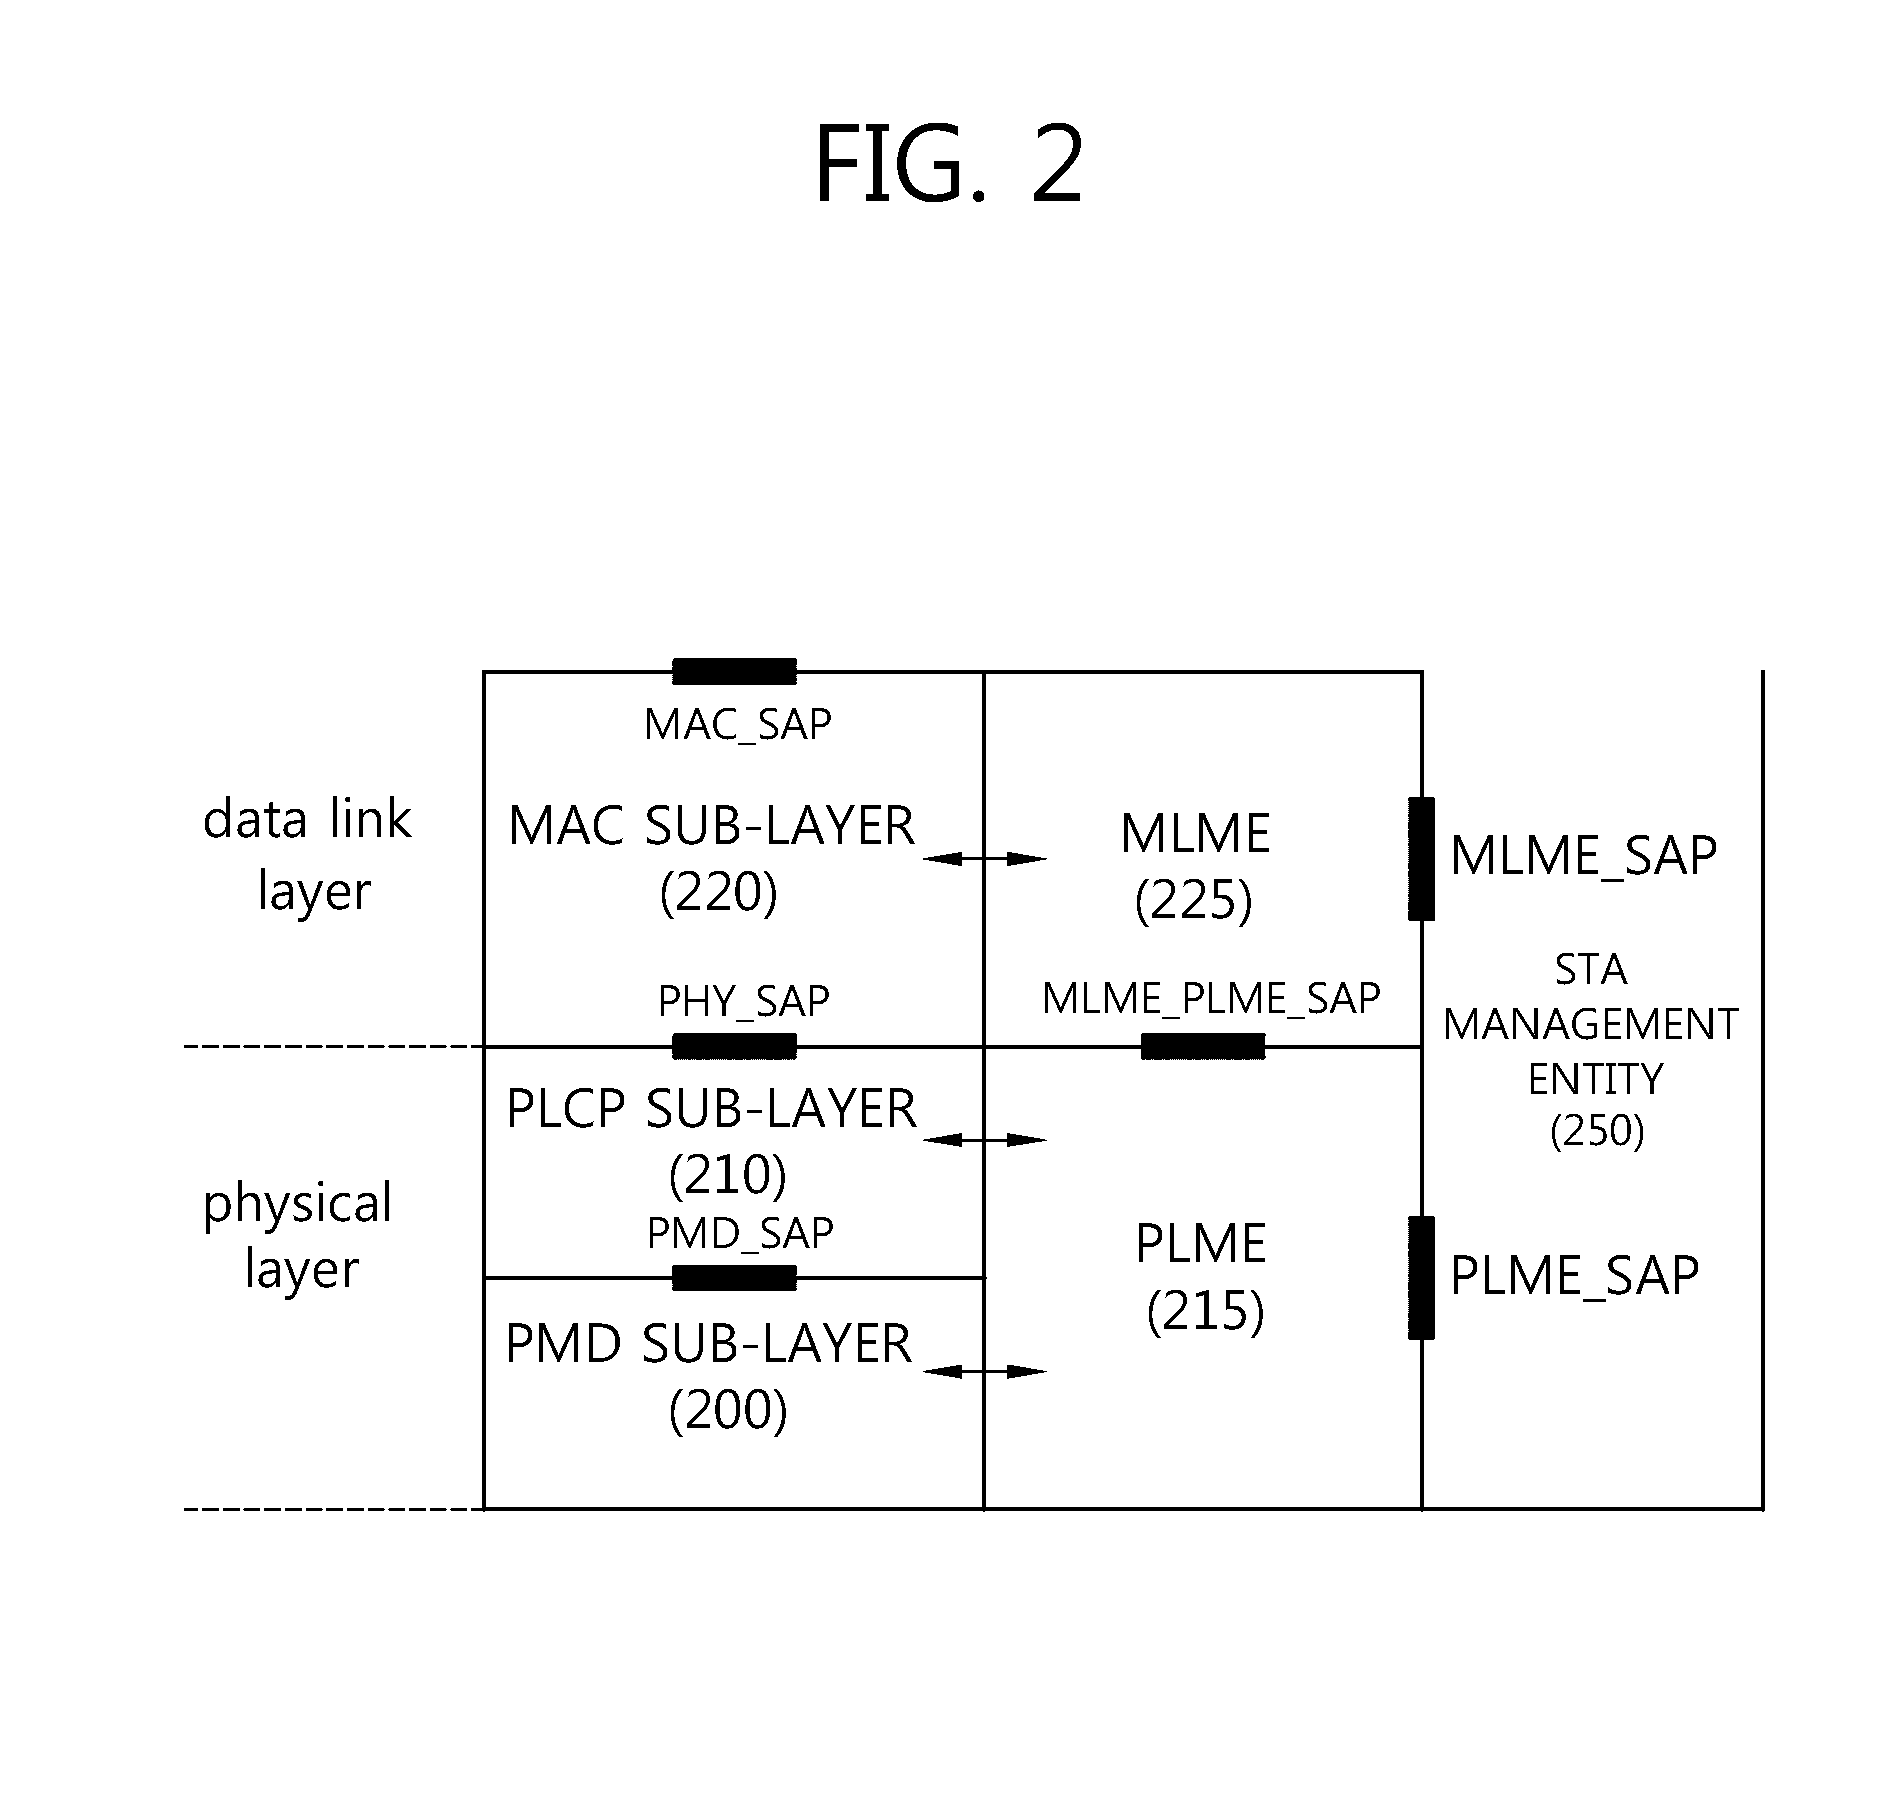 Method and device for performing channel access in wireless LAN